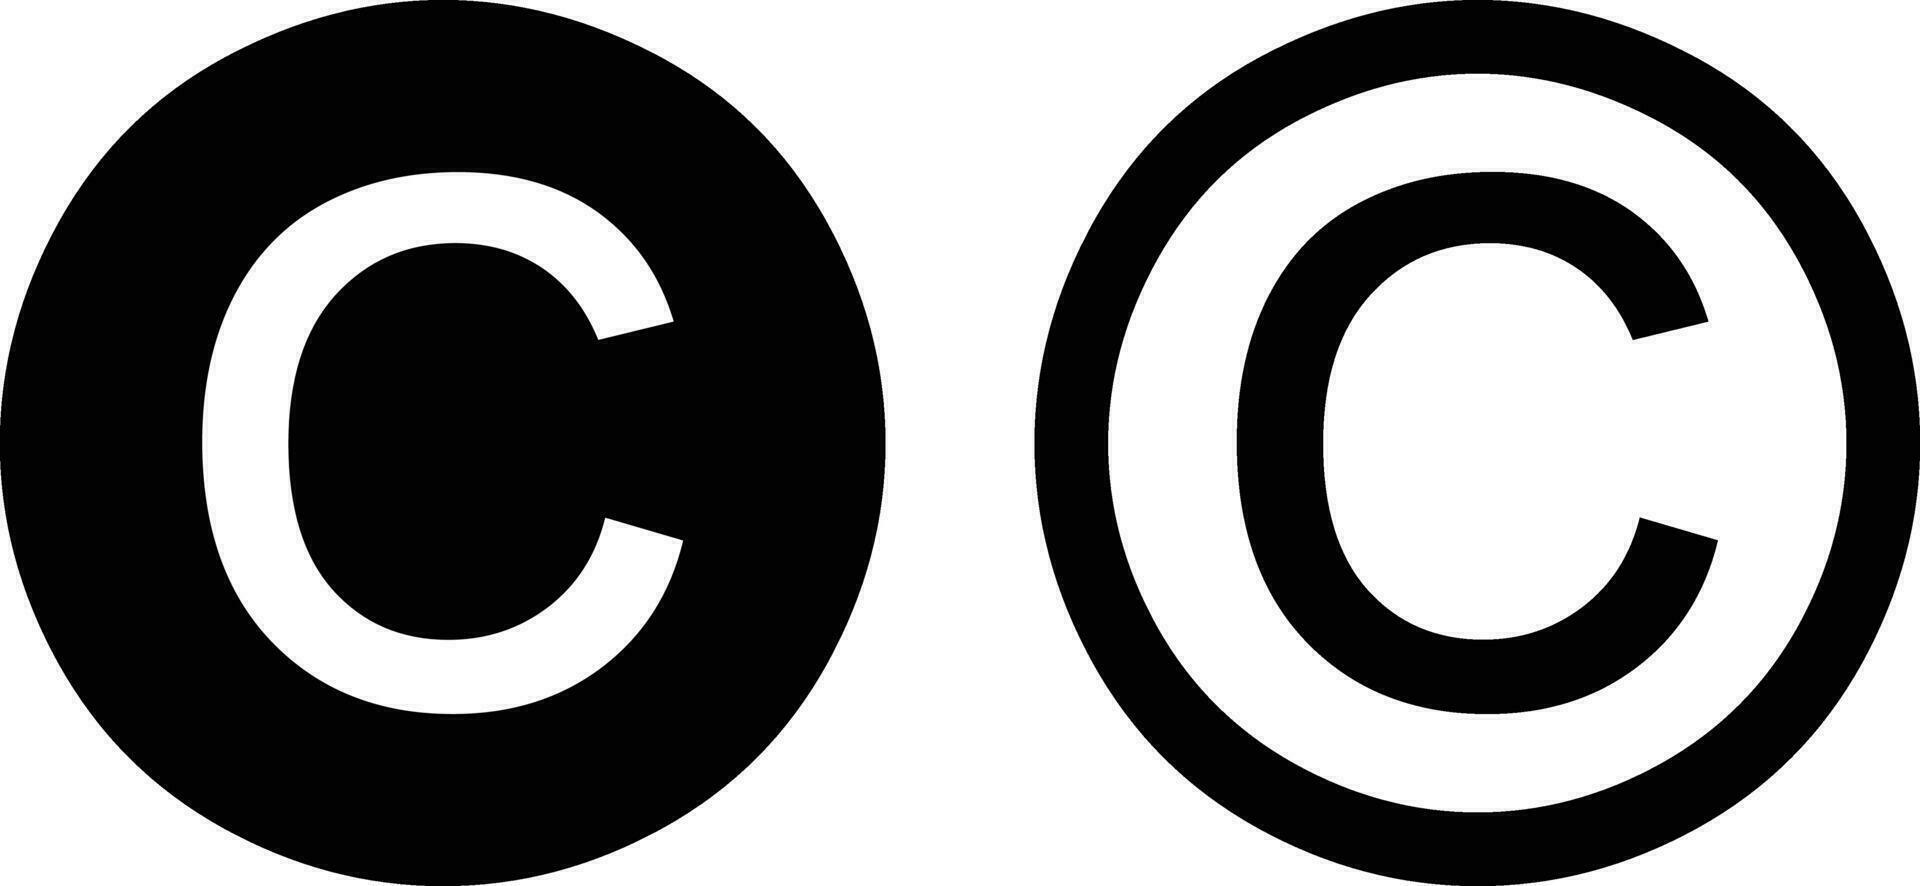 Copyright icon set vector in two styles isolated on white background . Copyright button